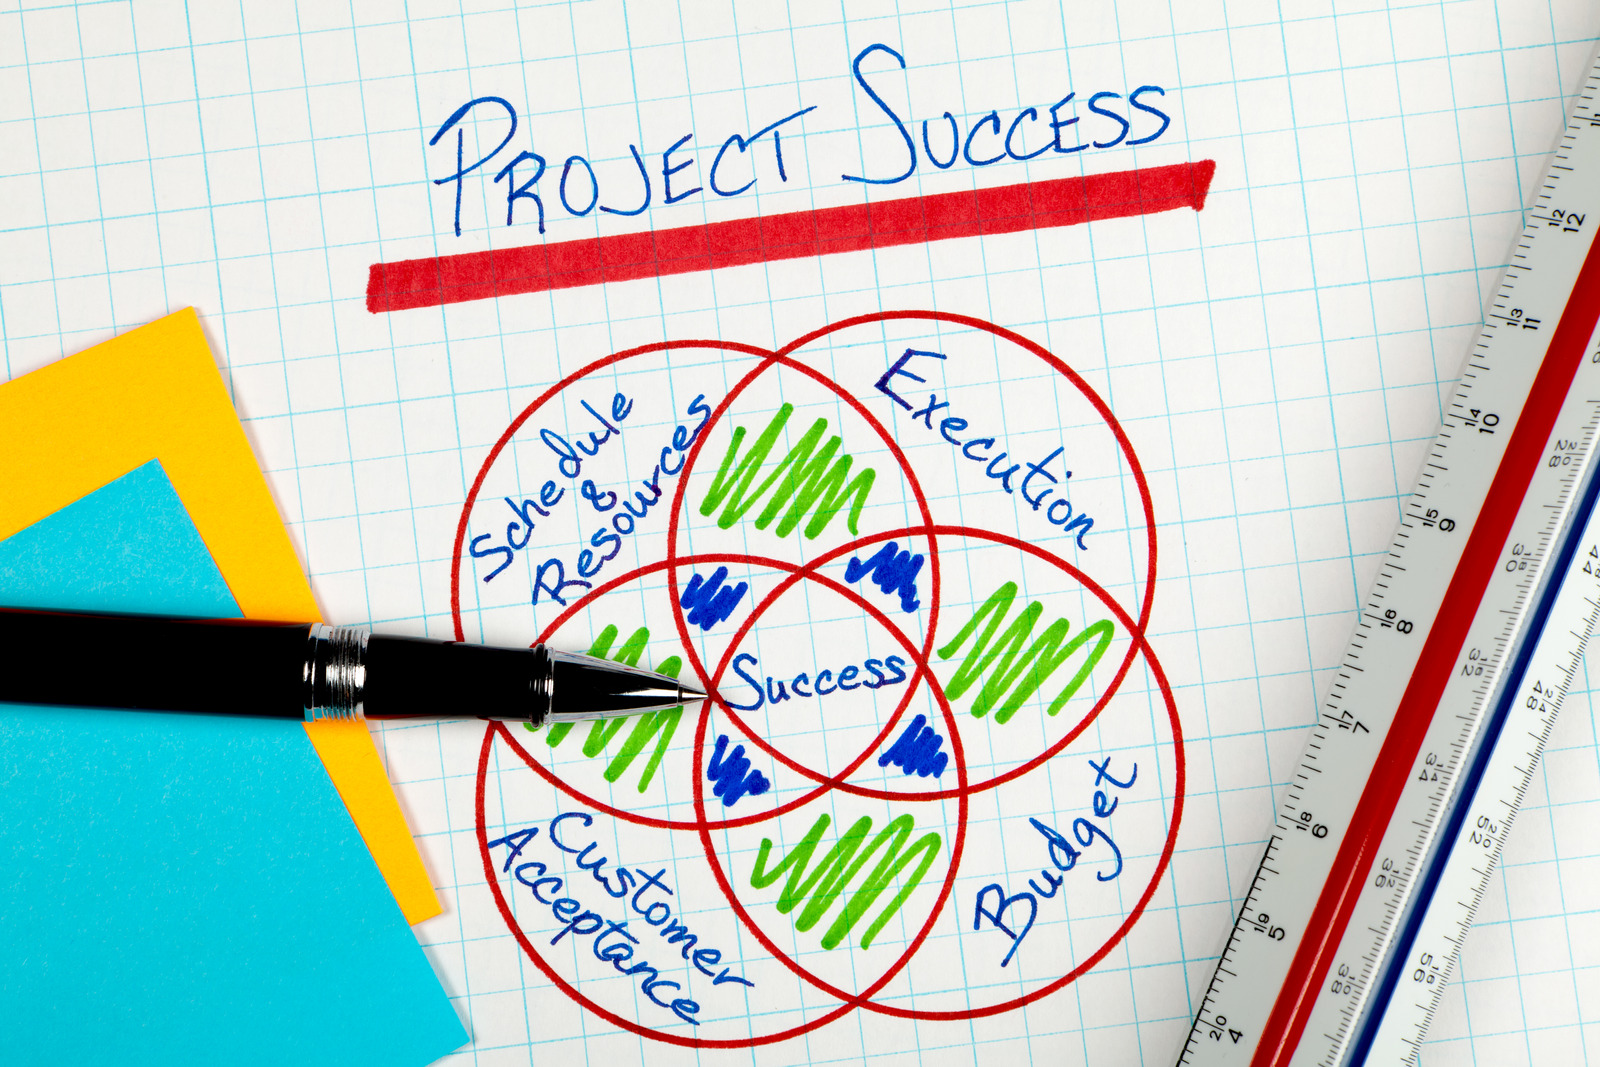 Diagram of the different project management components.